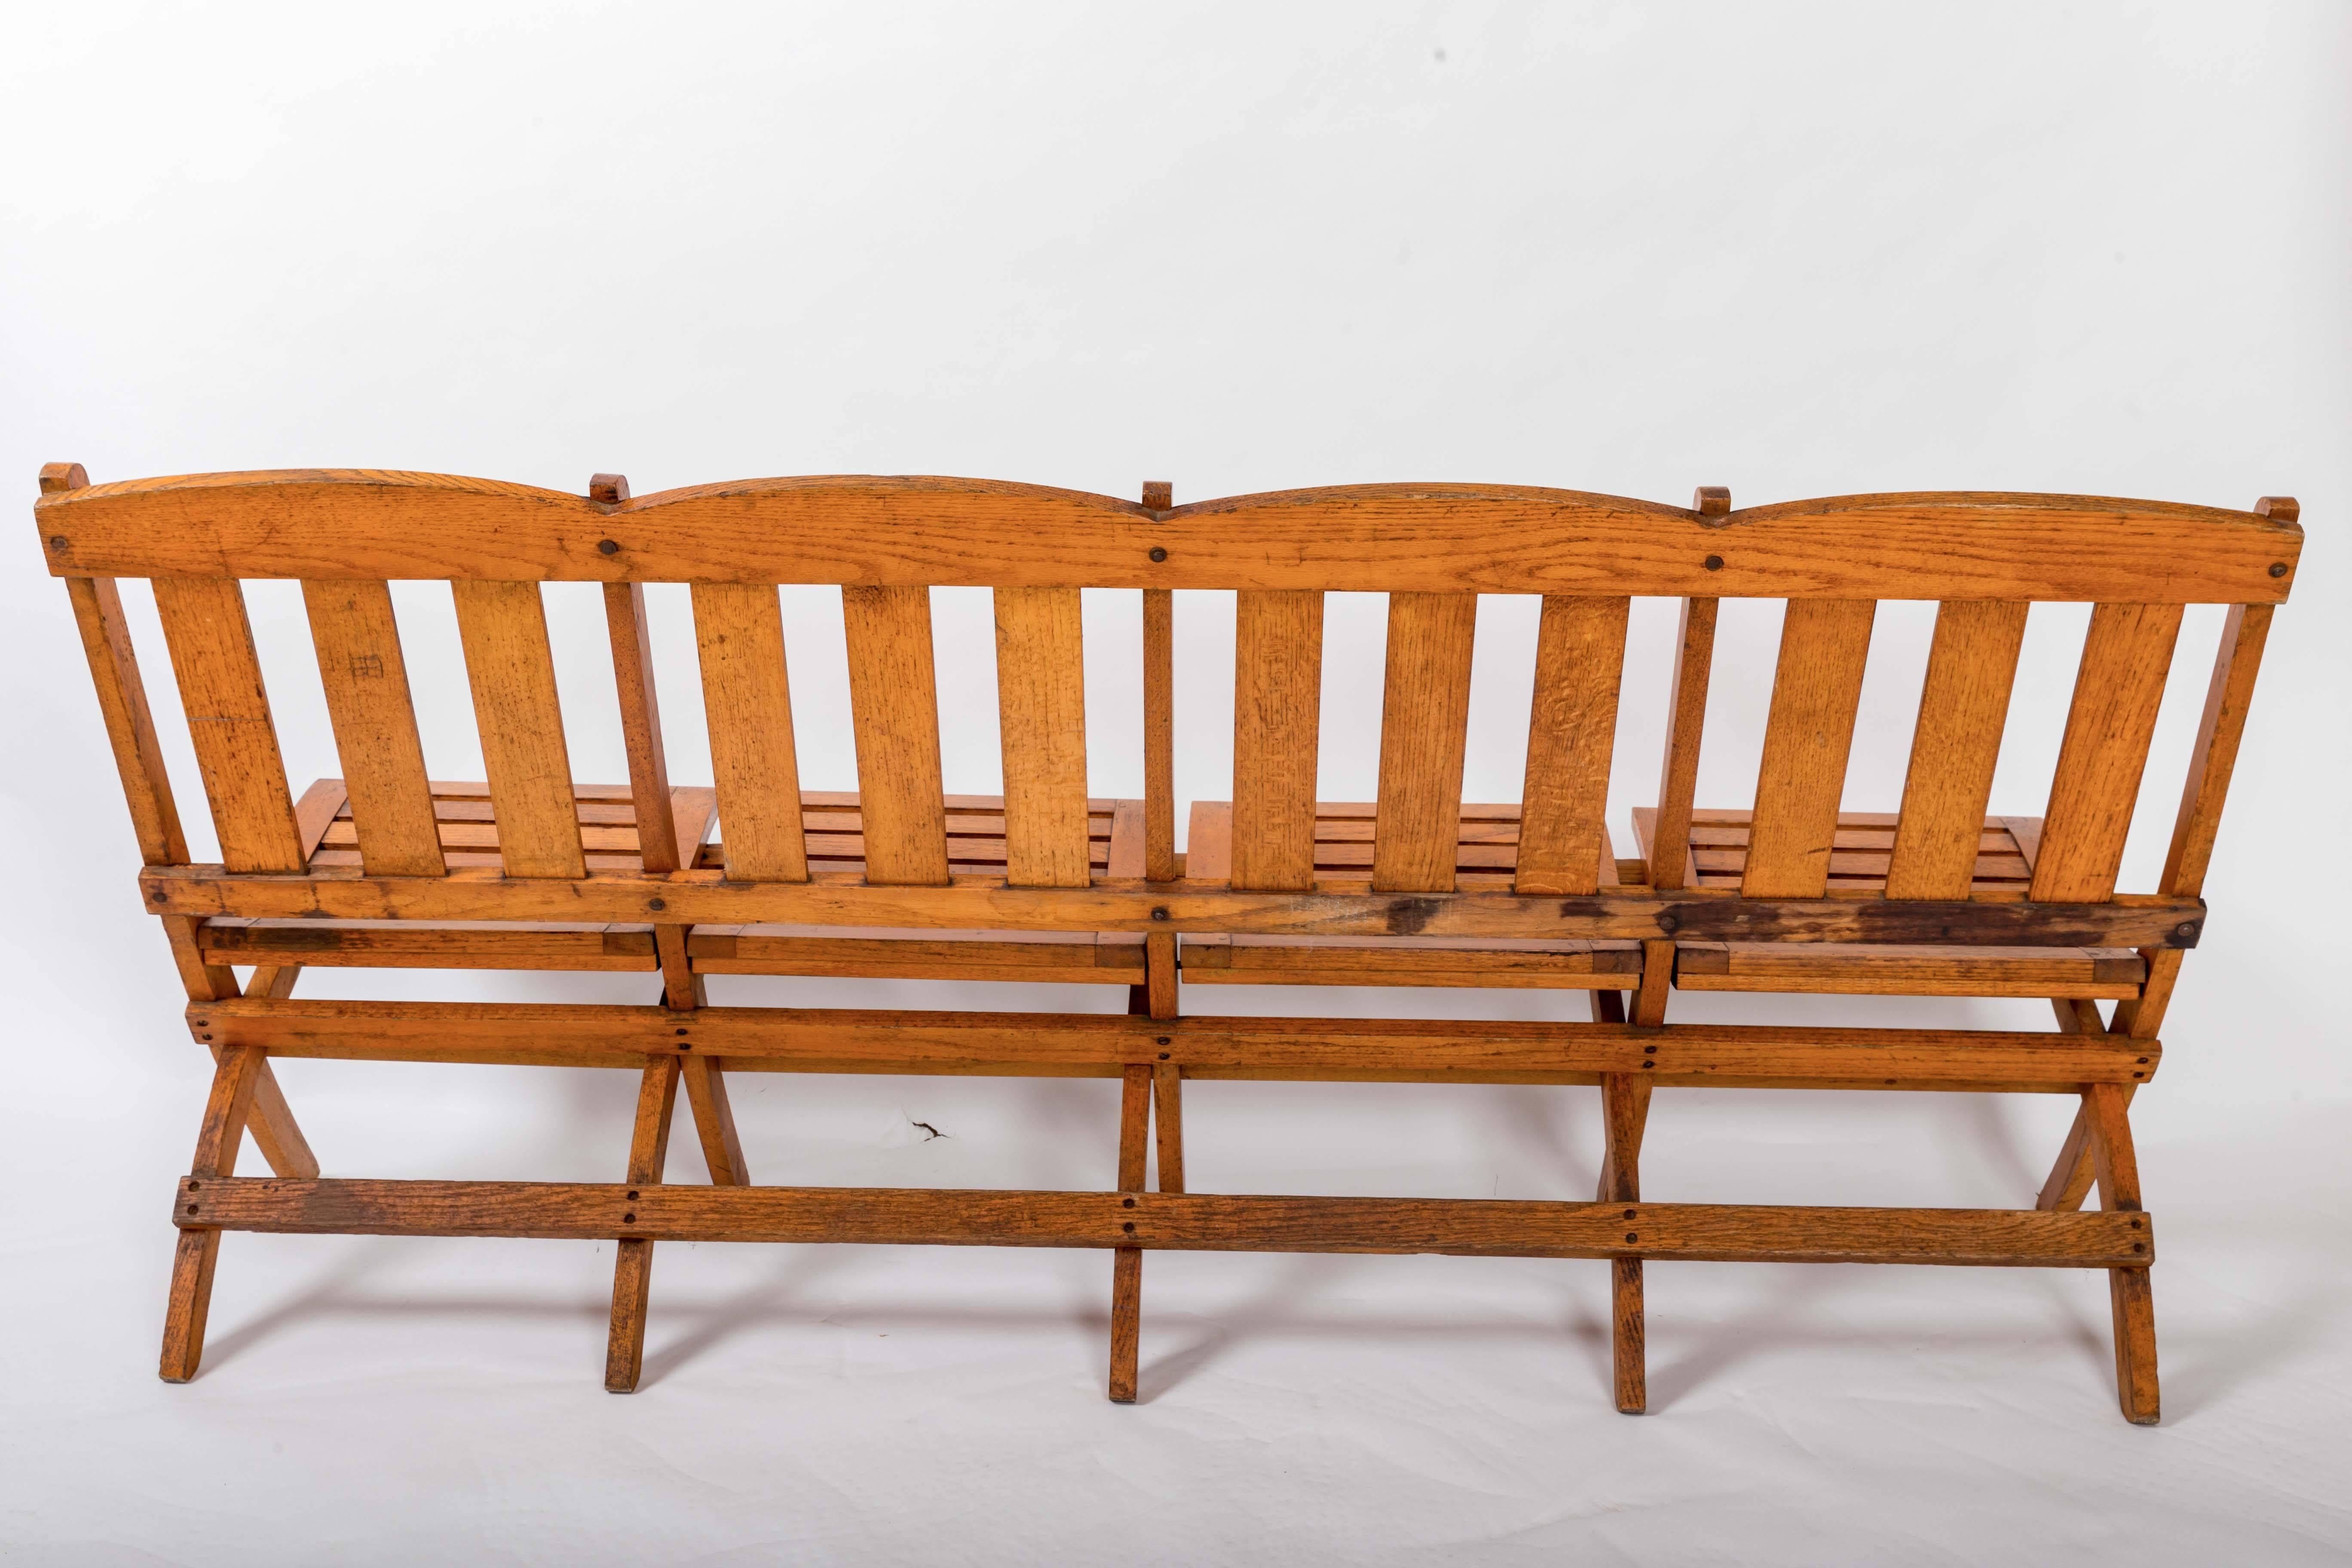 1920s Four-Seat Folding Railroad Bench, Capetown South Africa, circa 1920s For Sale 2